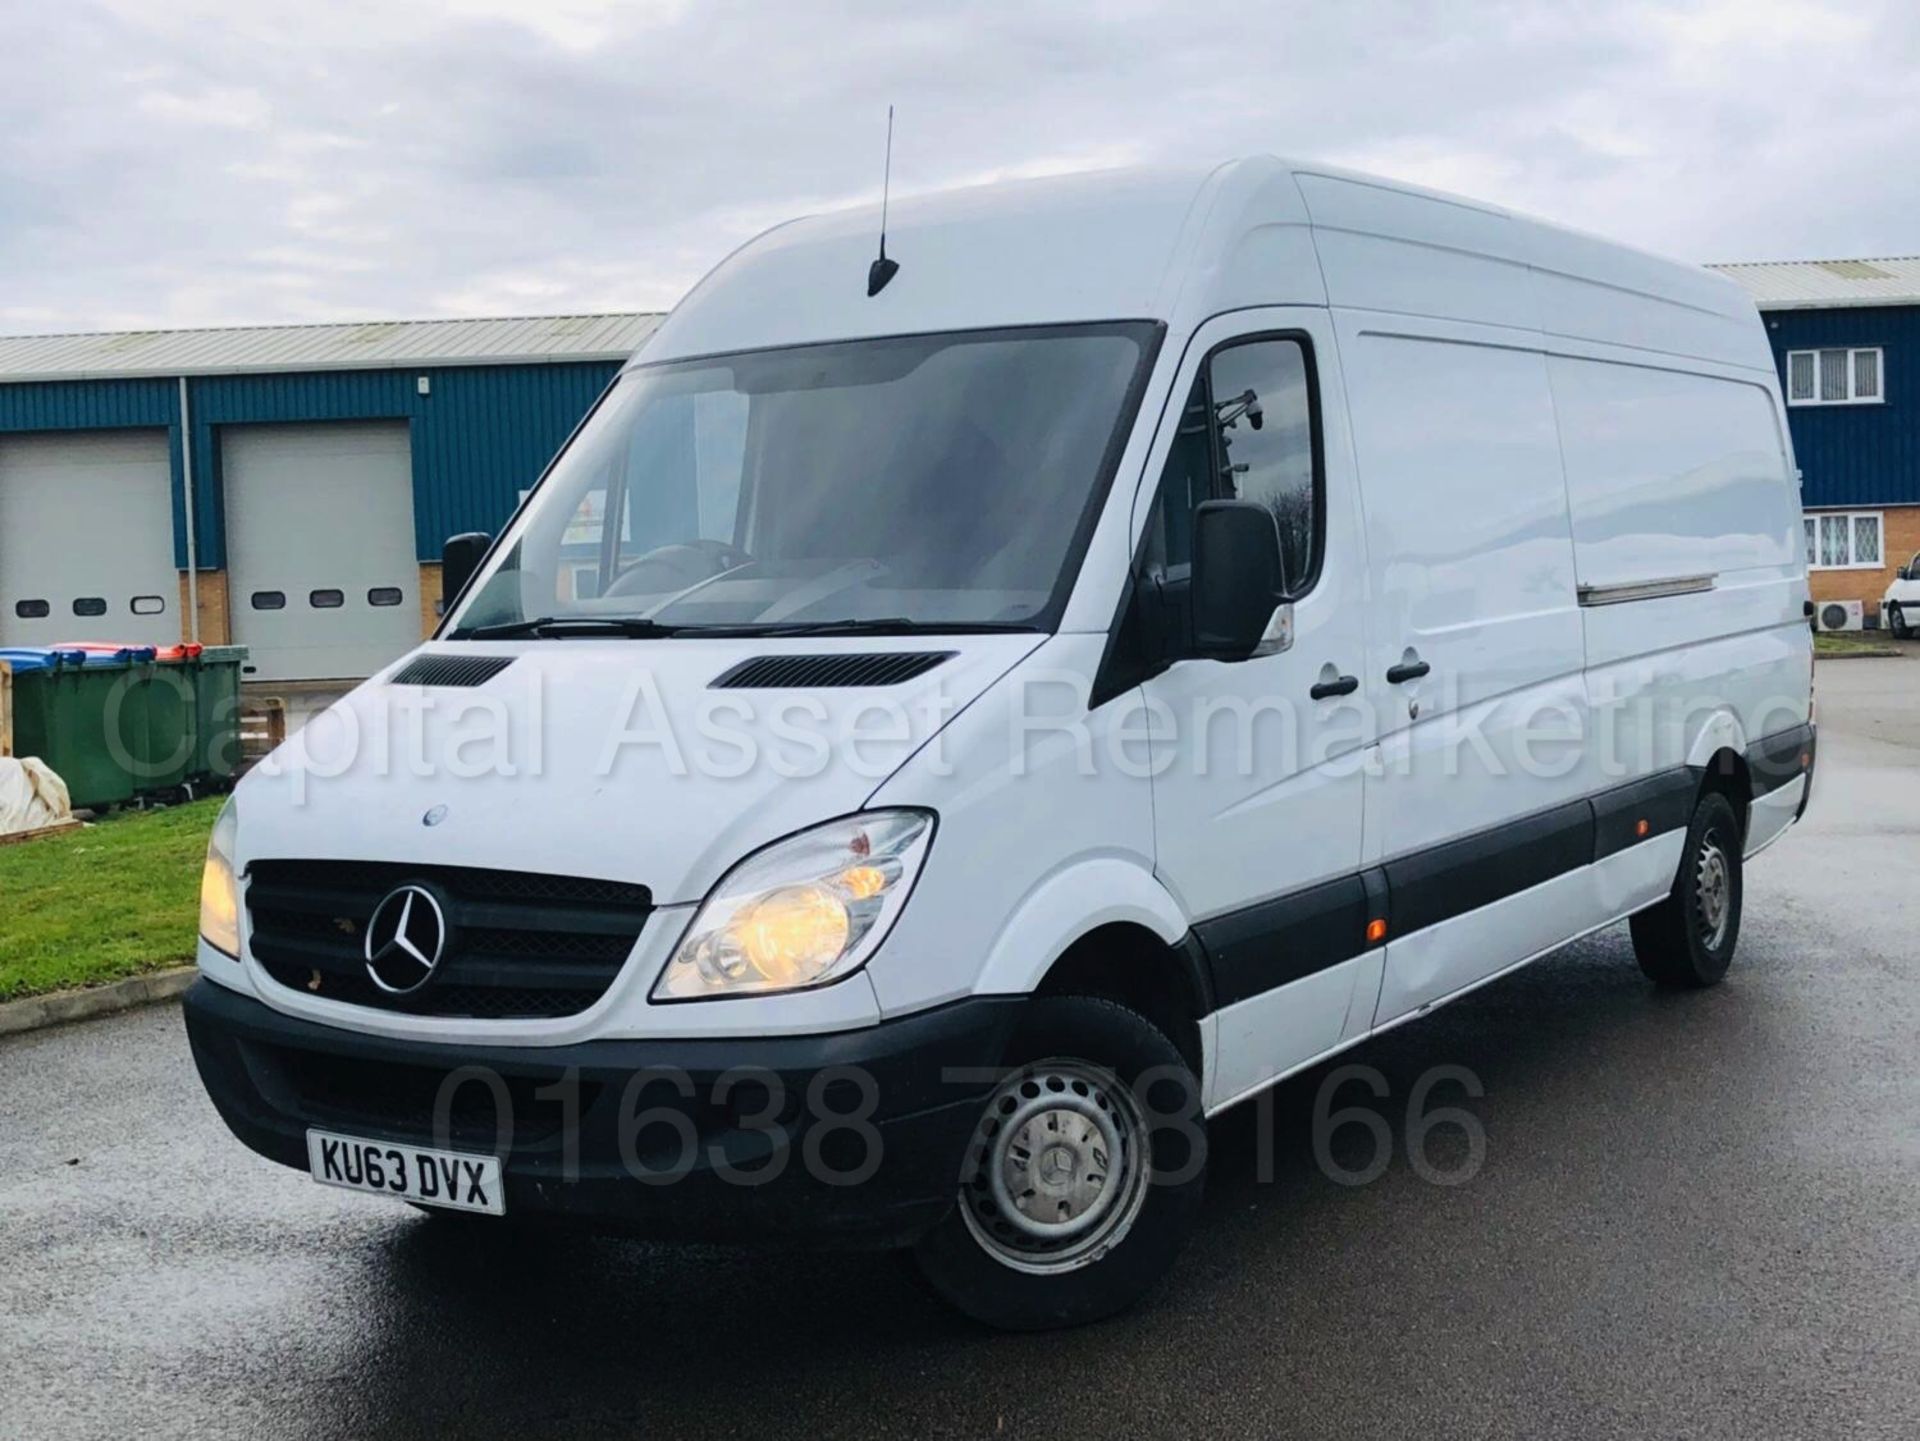 MERCEDES-BENZ SPRINTER 313 CDI *LWB HI-ROOF* (2014 MODEL) '130 BHP - 6 SPEED' (1 OWNER FROM NEW) - Image 7 of 32